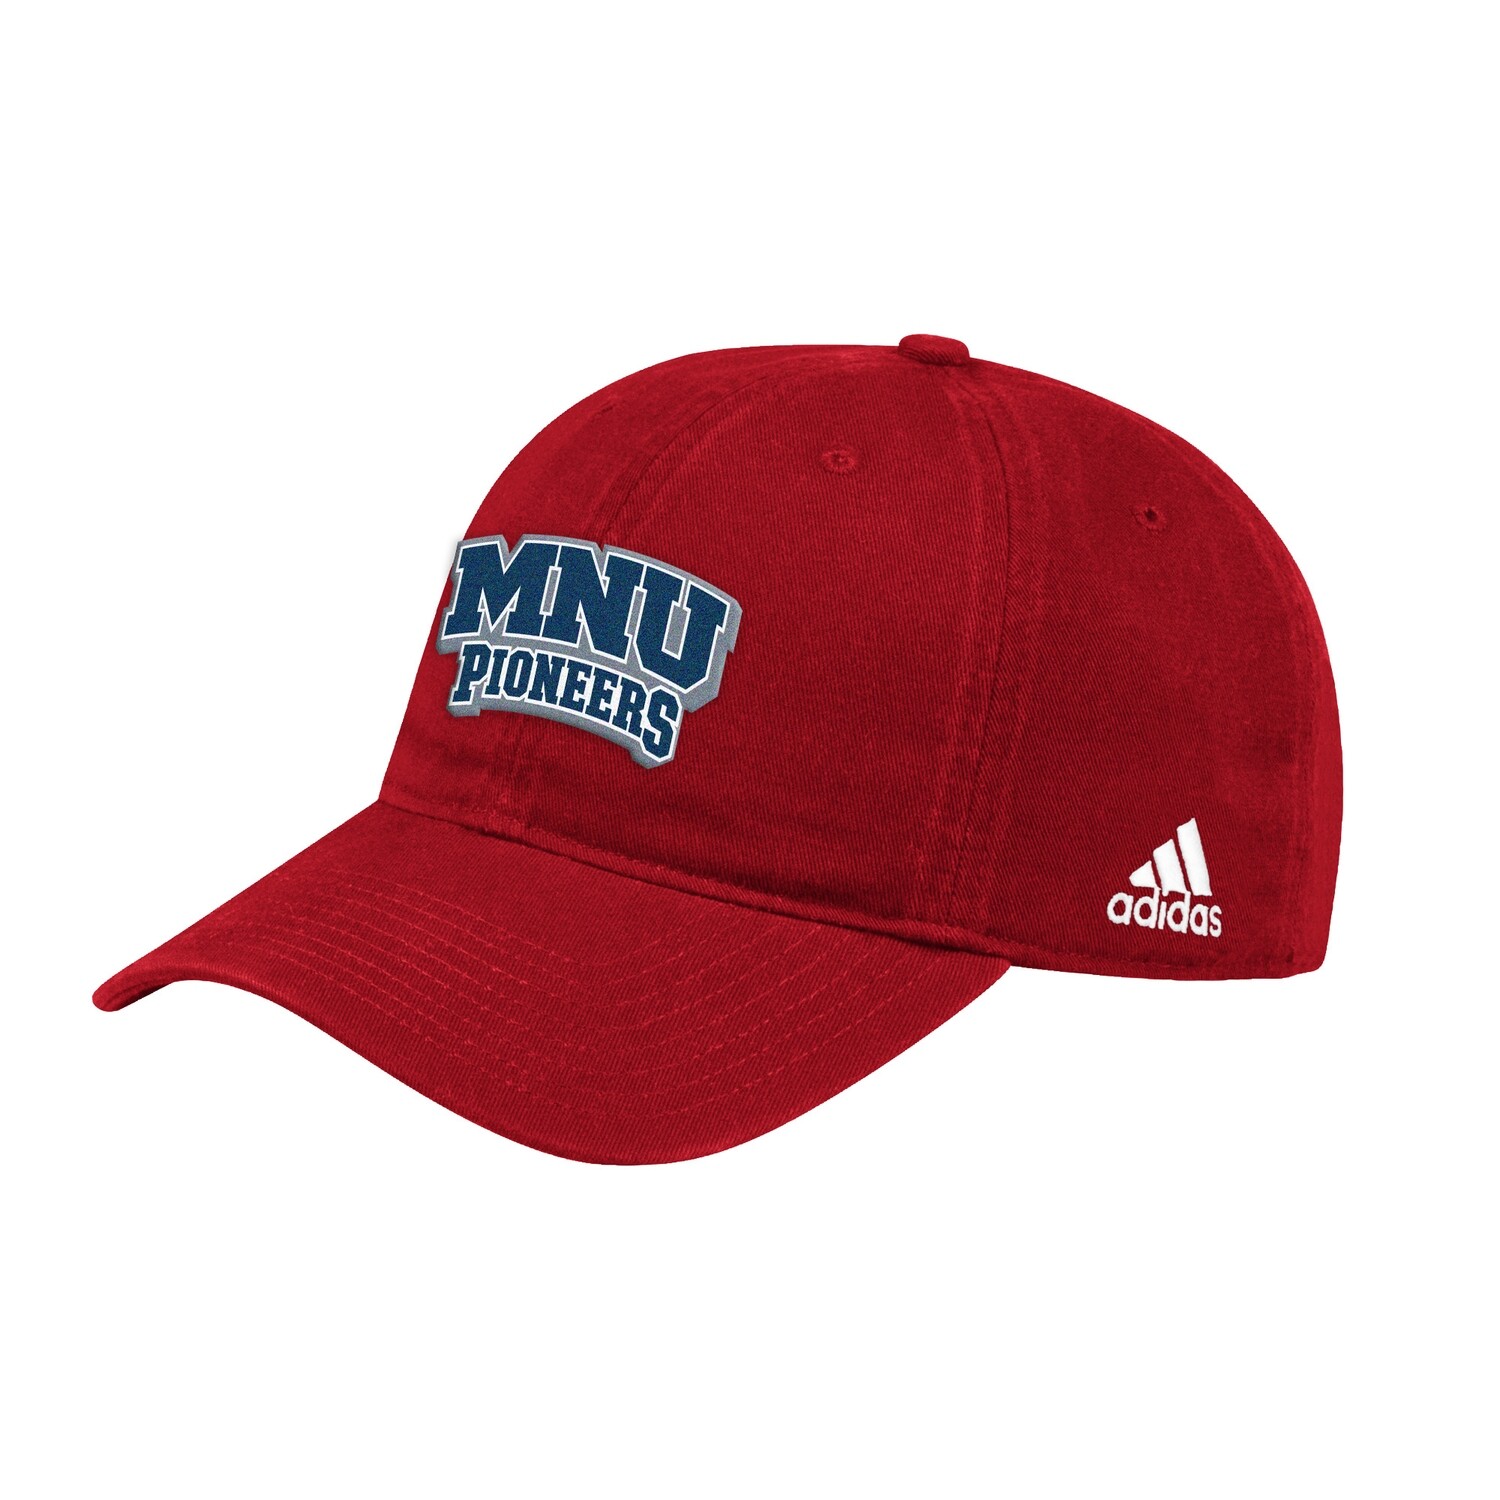 Adidas Slouch Cap - Red